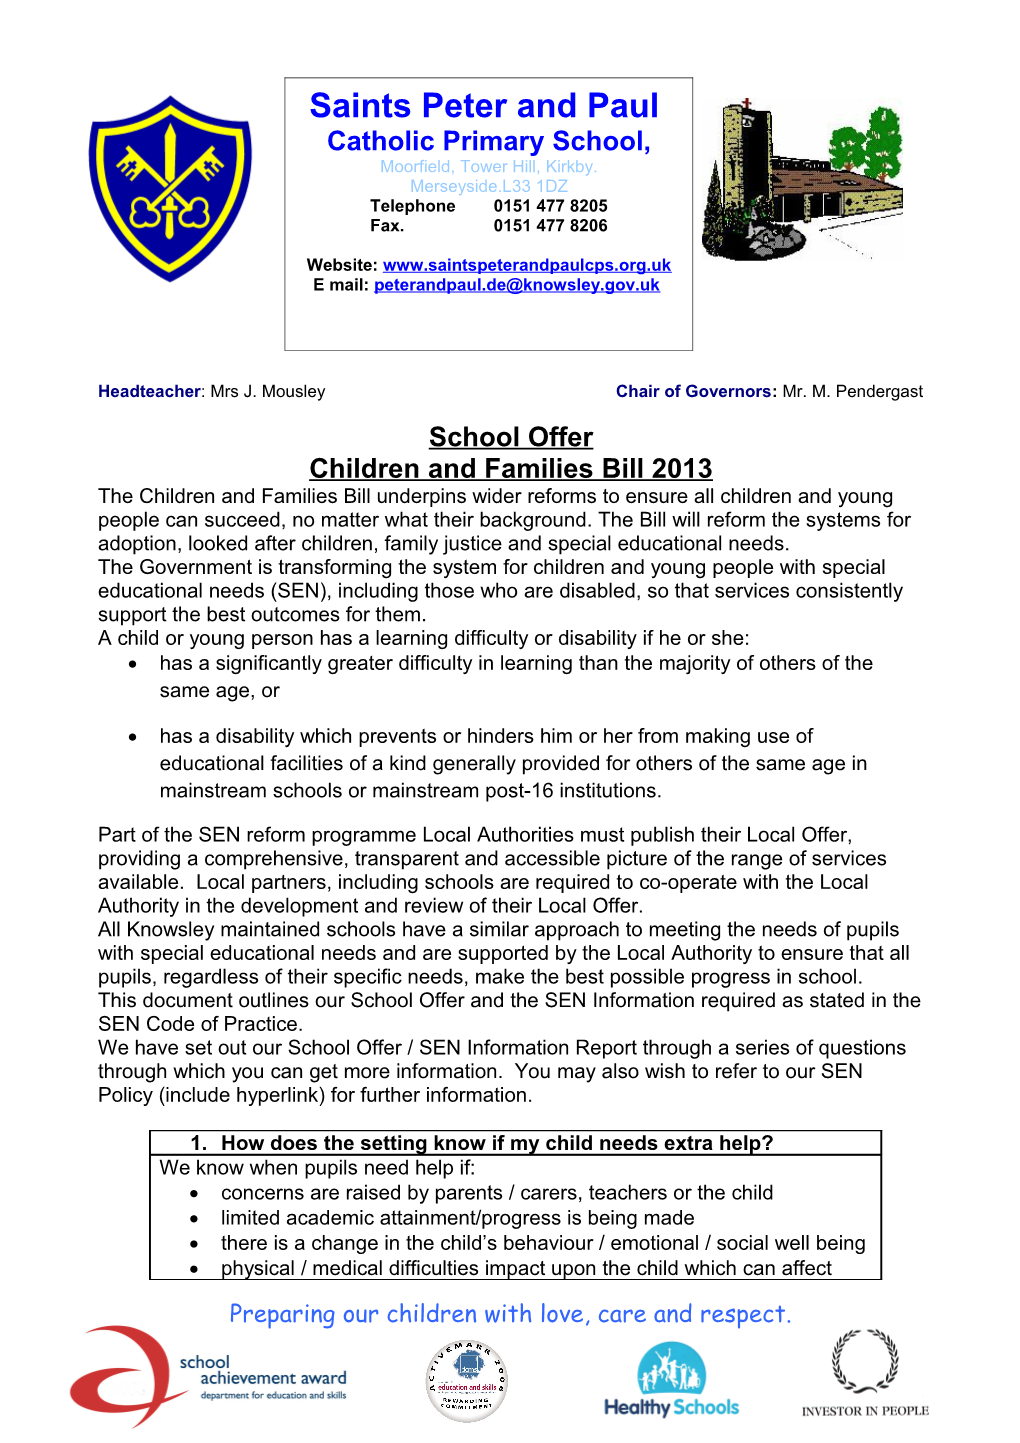 Children and Families Bill 2013